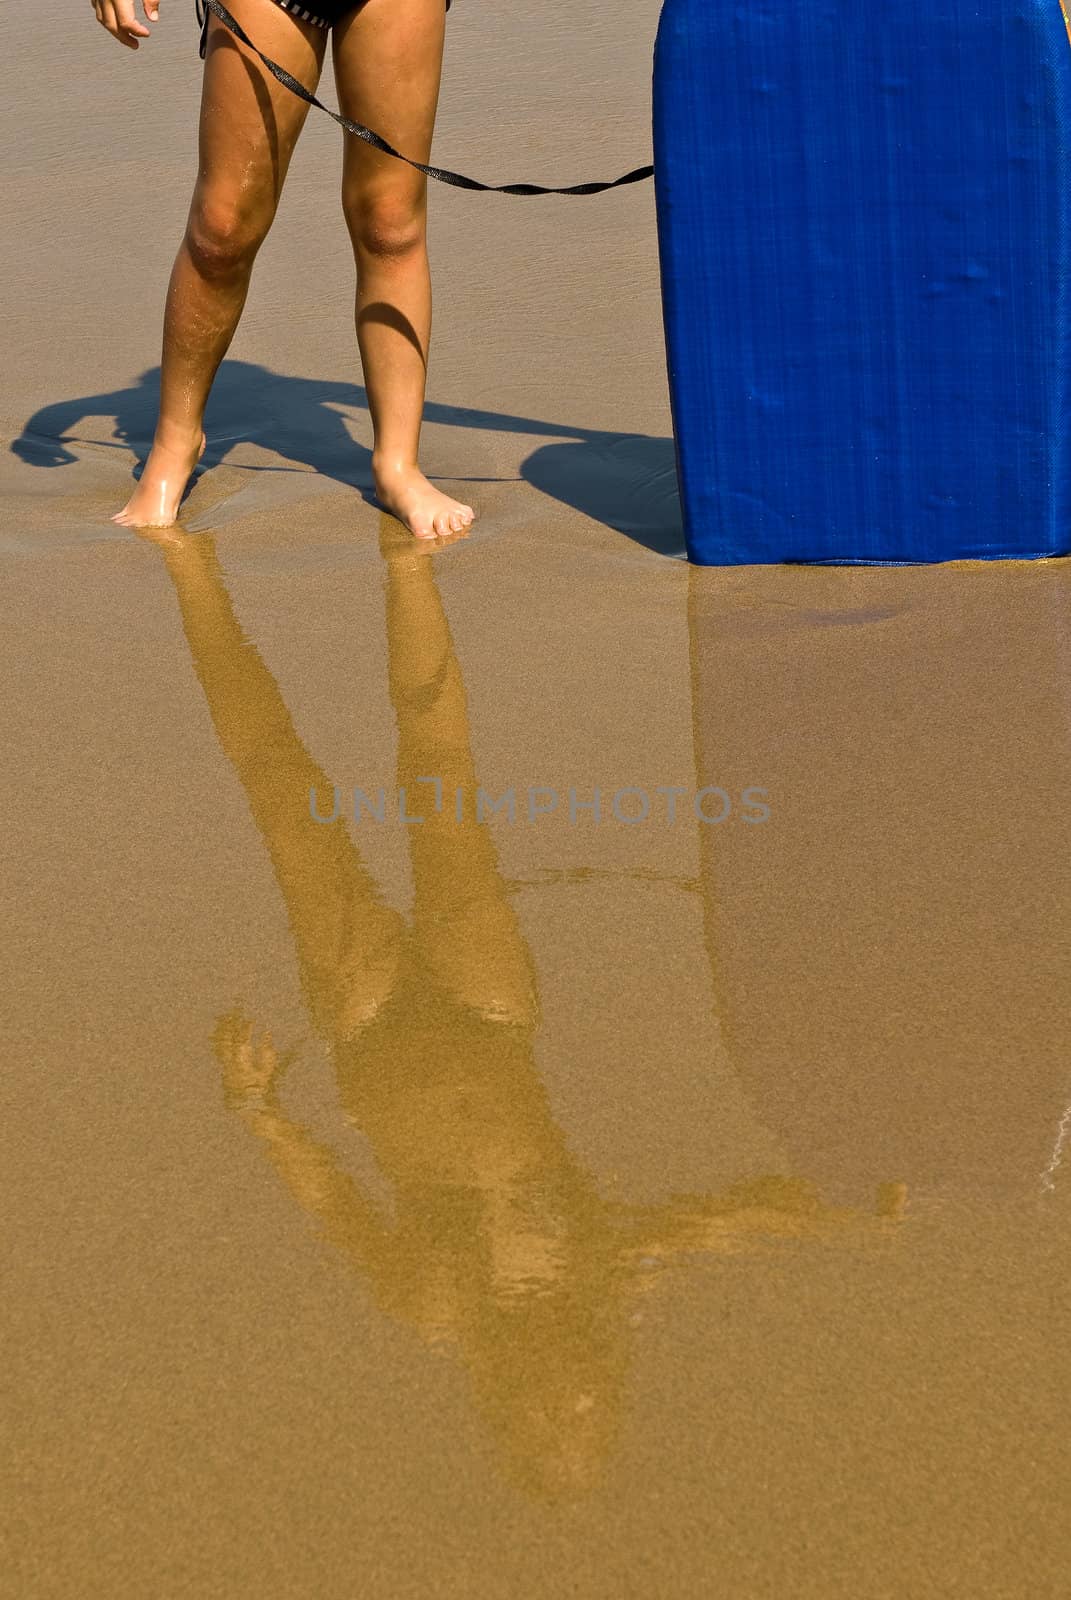 Girl reflecting on beach sand by Ansunette